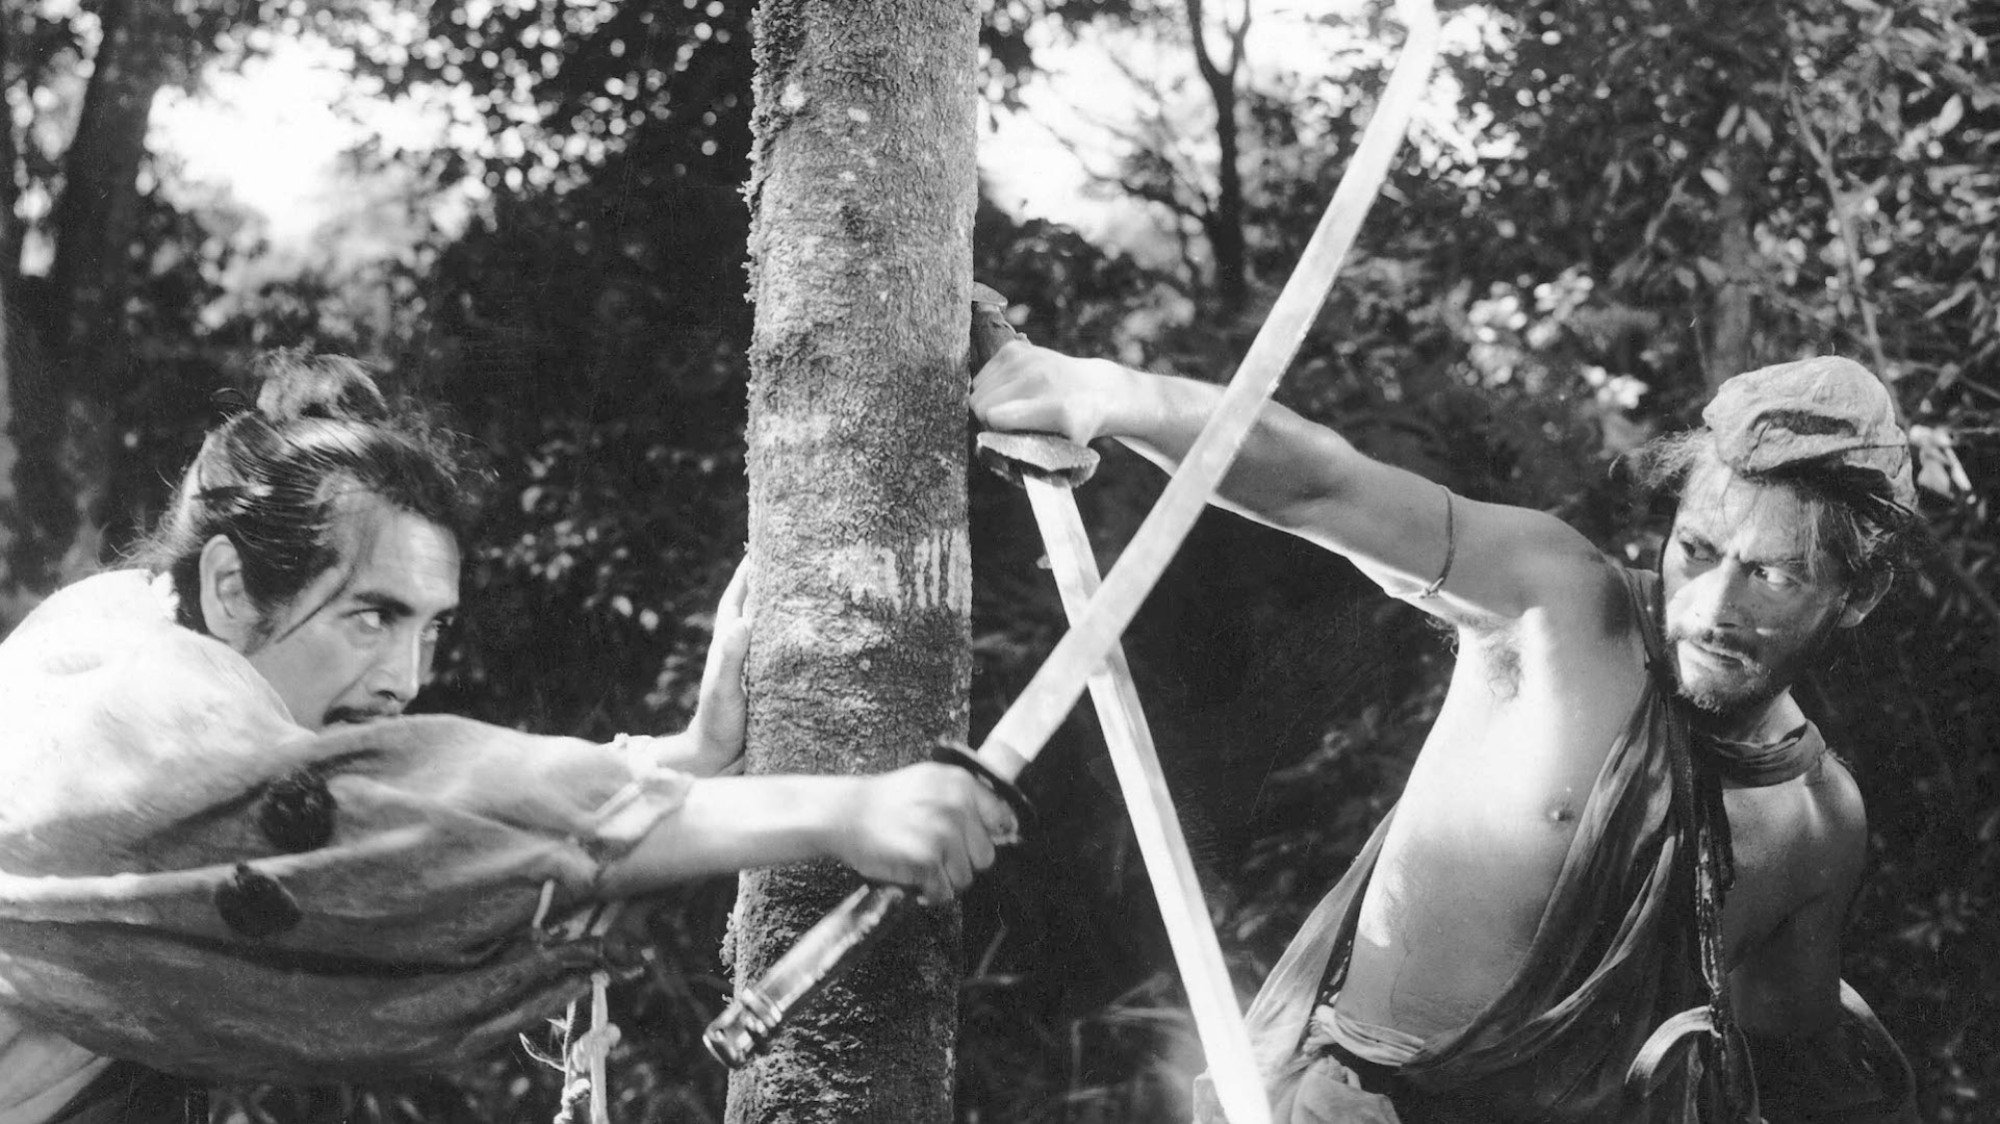 Two men fight with swords in a forest.